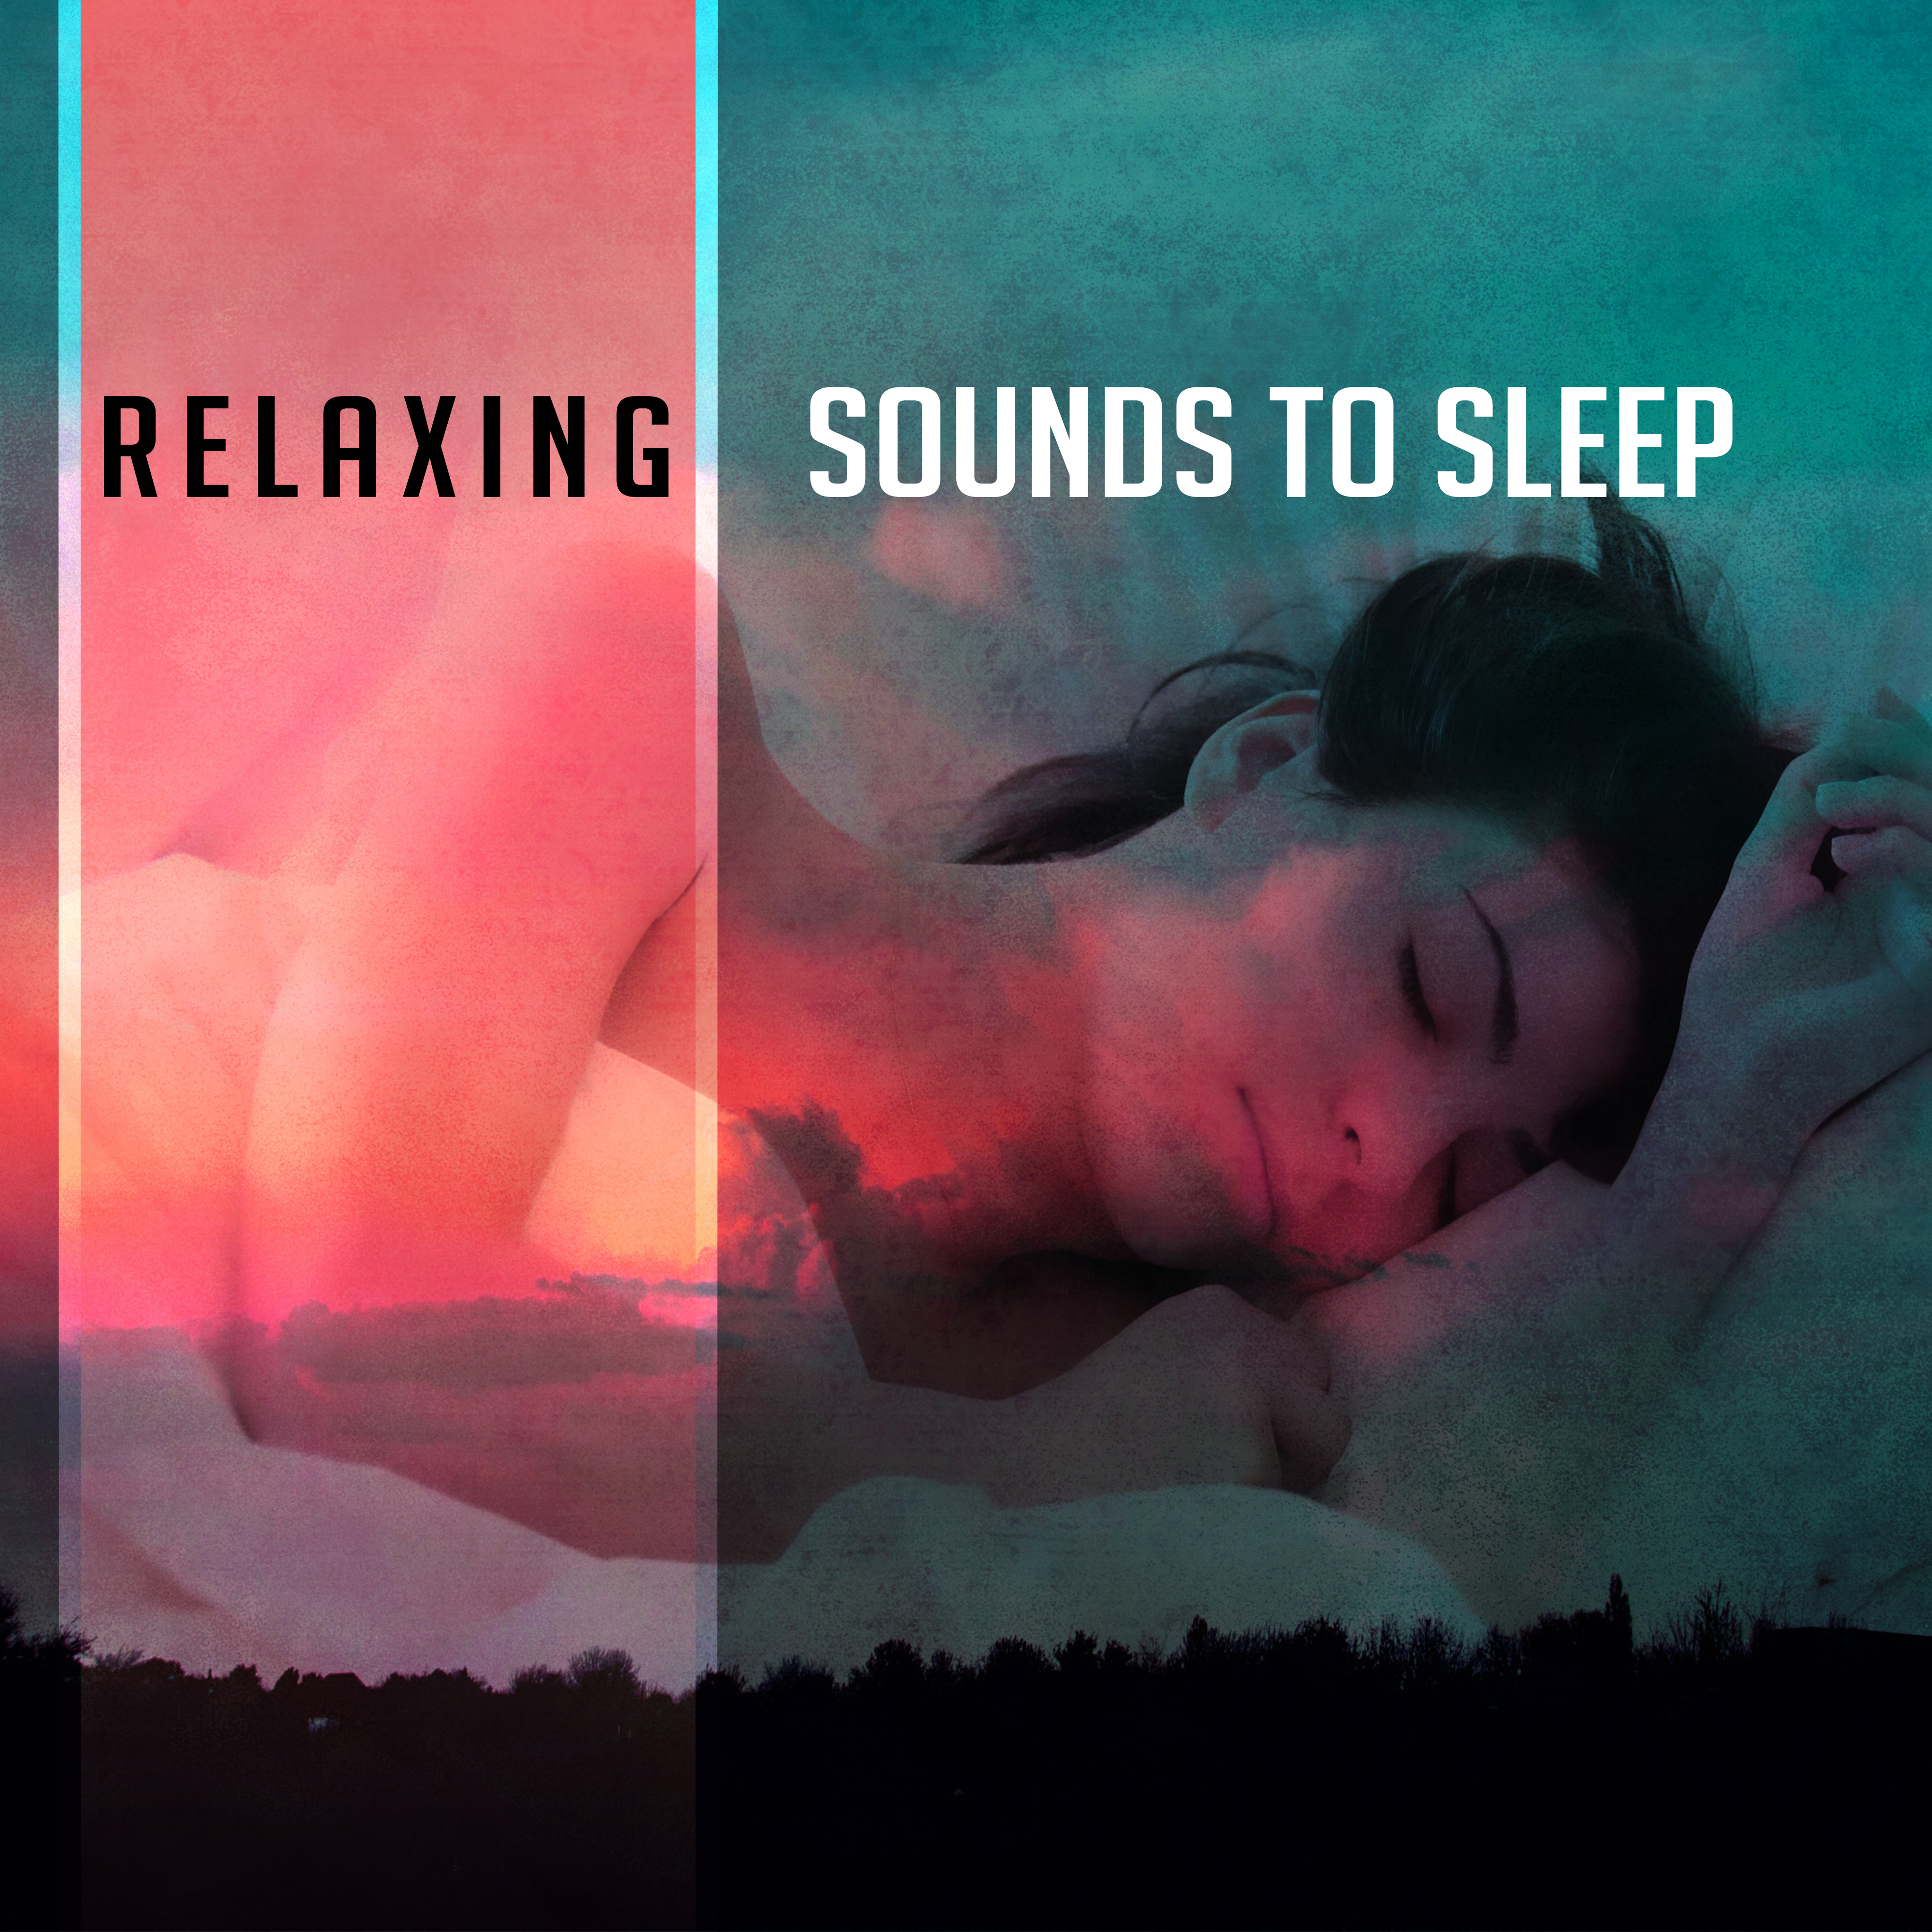 Relaxing Sounds to Sleep – Calming Waves, Healing Music, Sounds to Rest, Peaceful Spirit